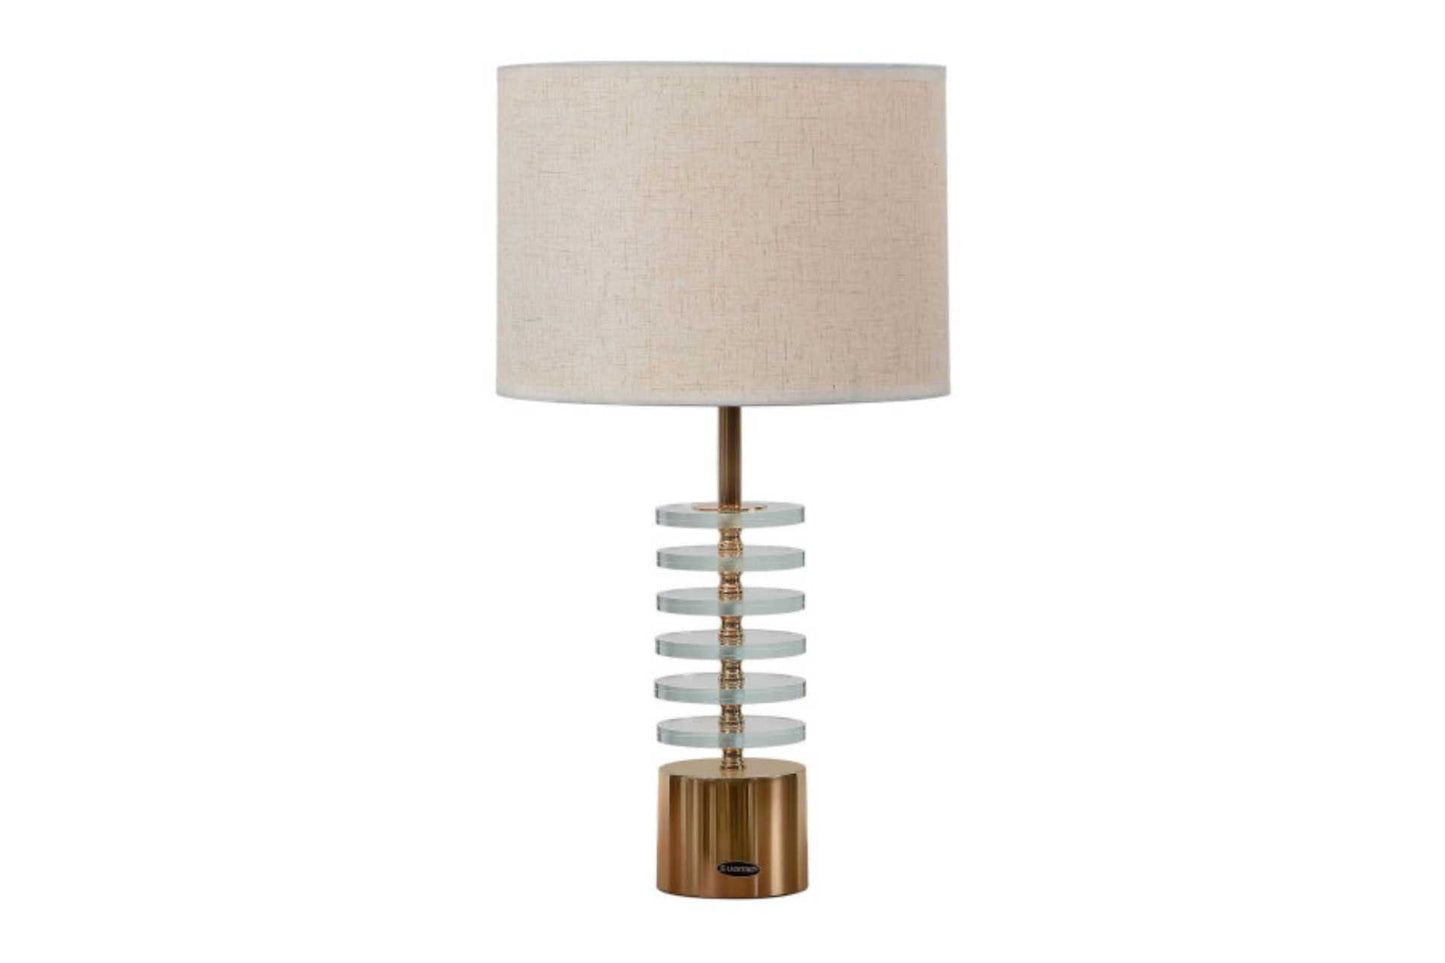 Contemporary table lamp. Beige shade and gold stand.